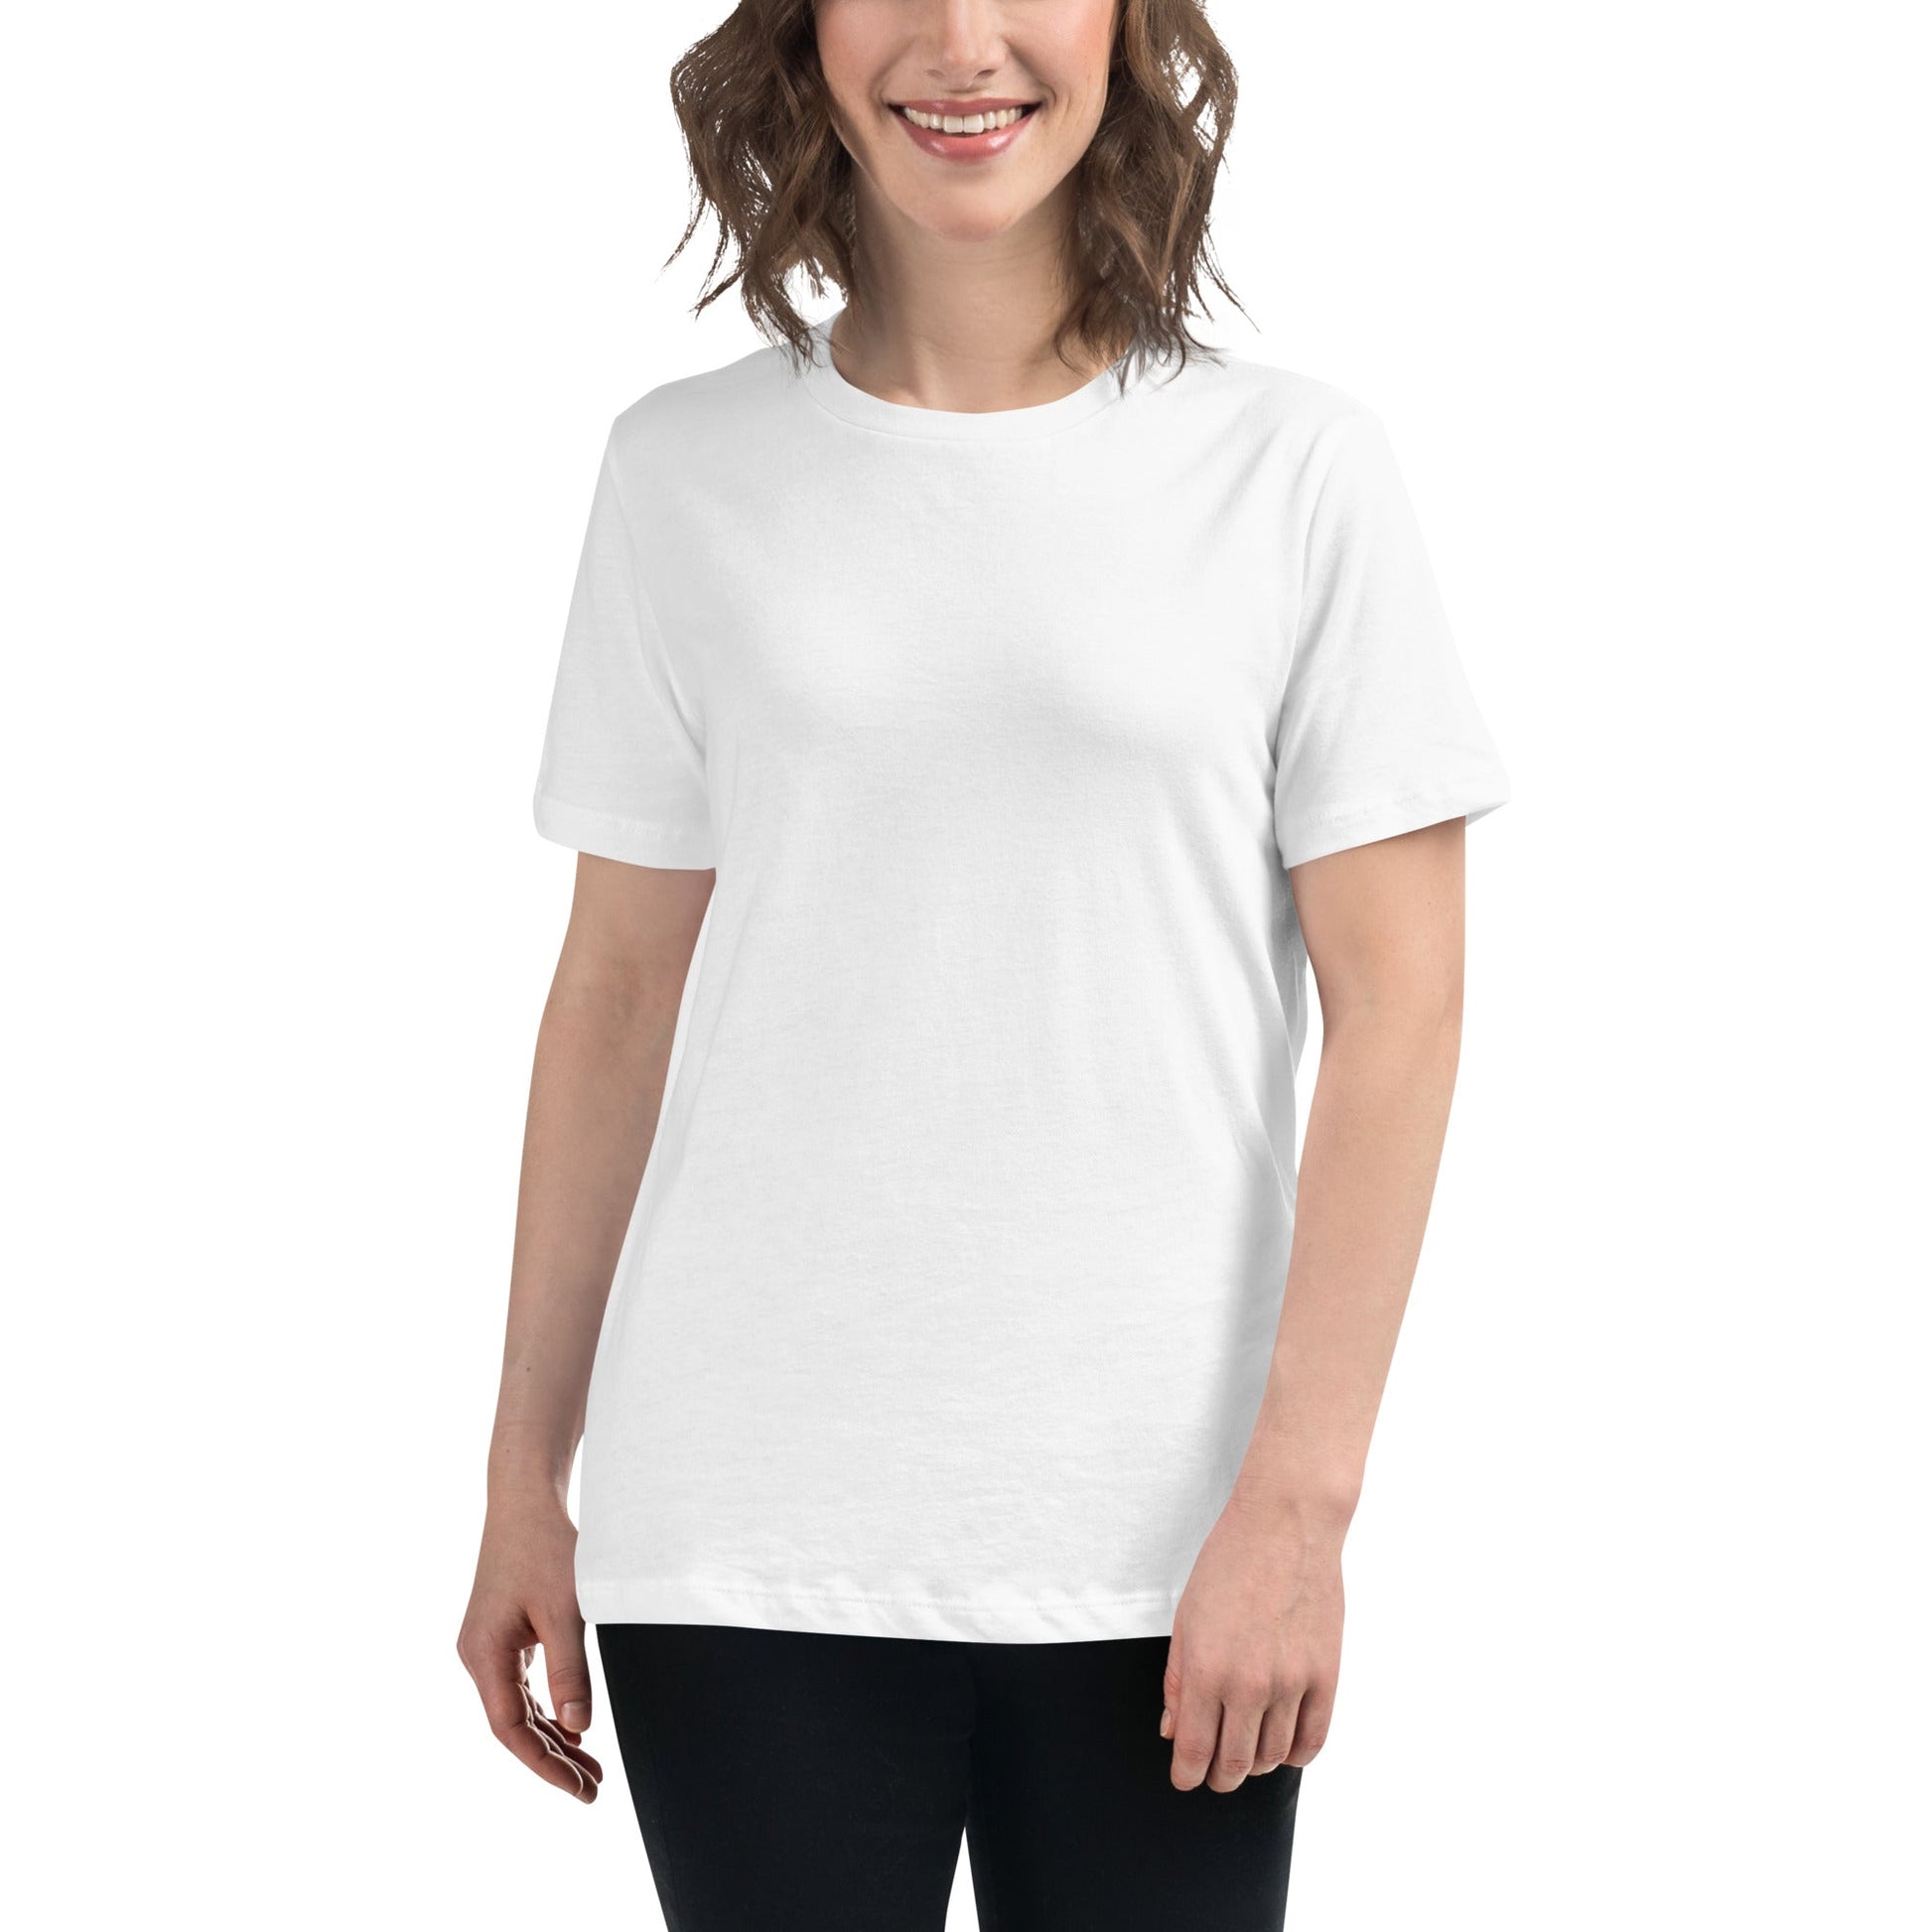 I did my own research - Women's T-Shirt